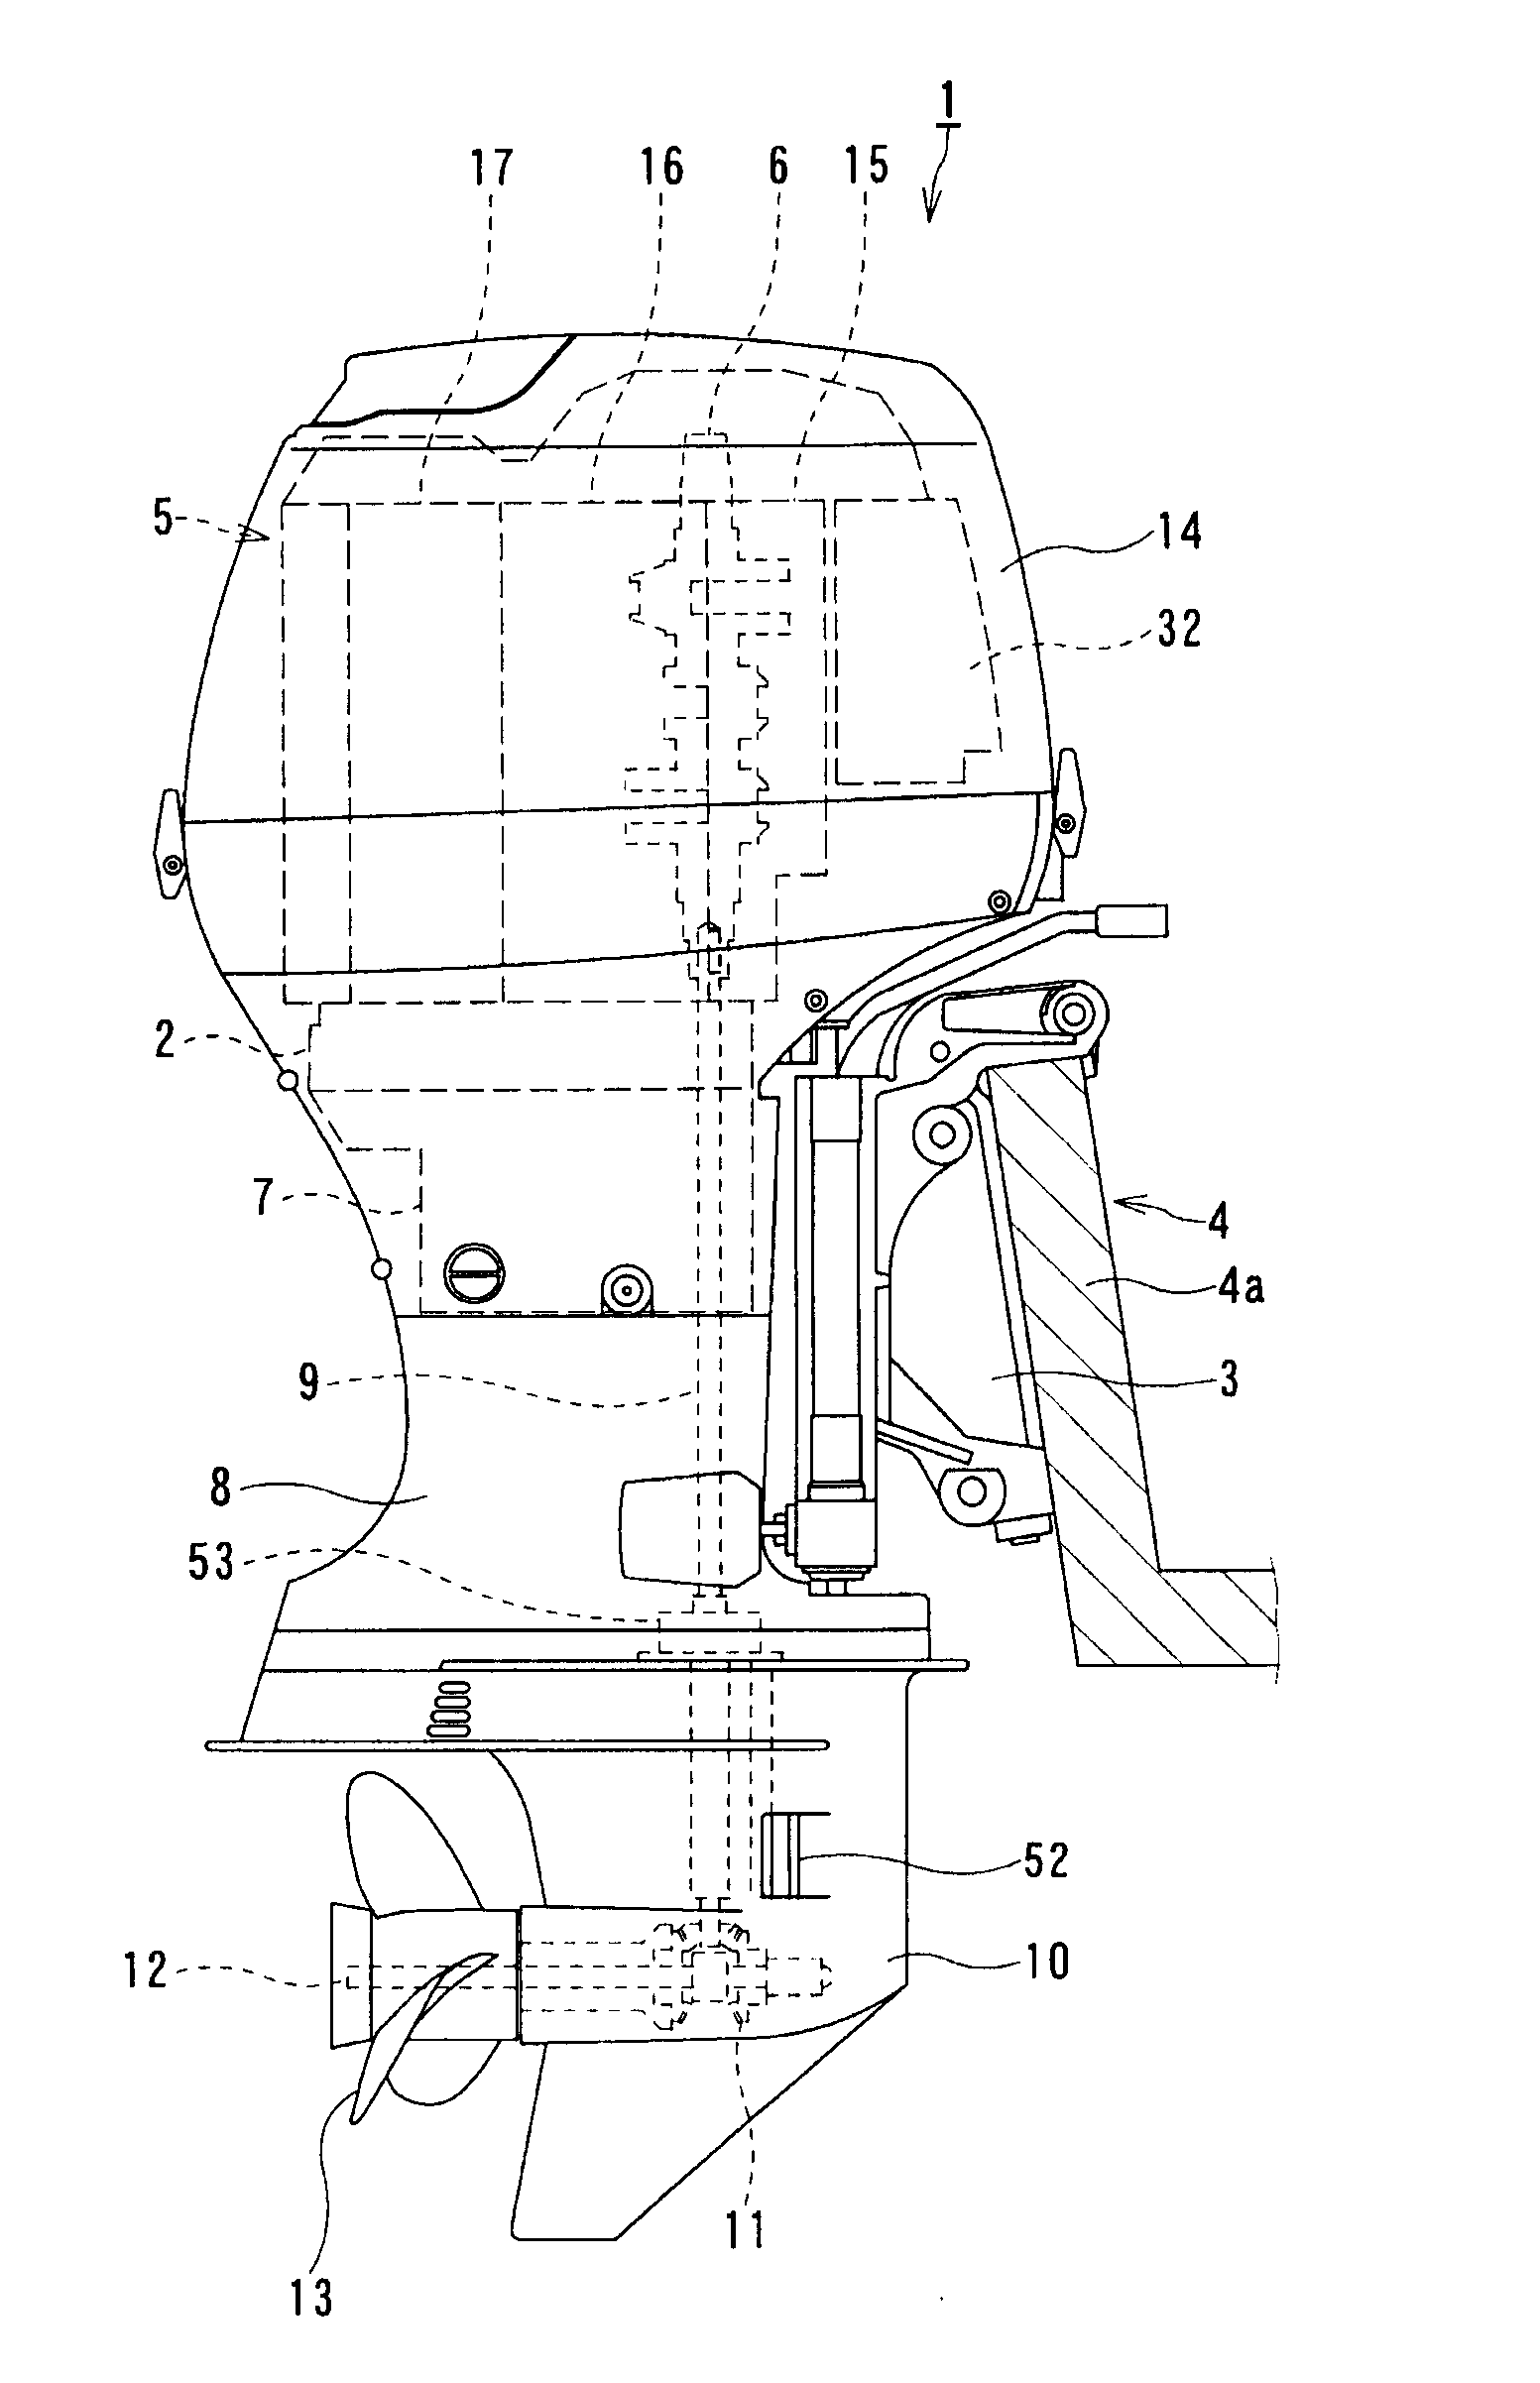 Exhaust system of outboard motor